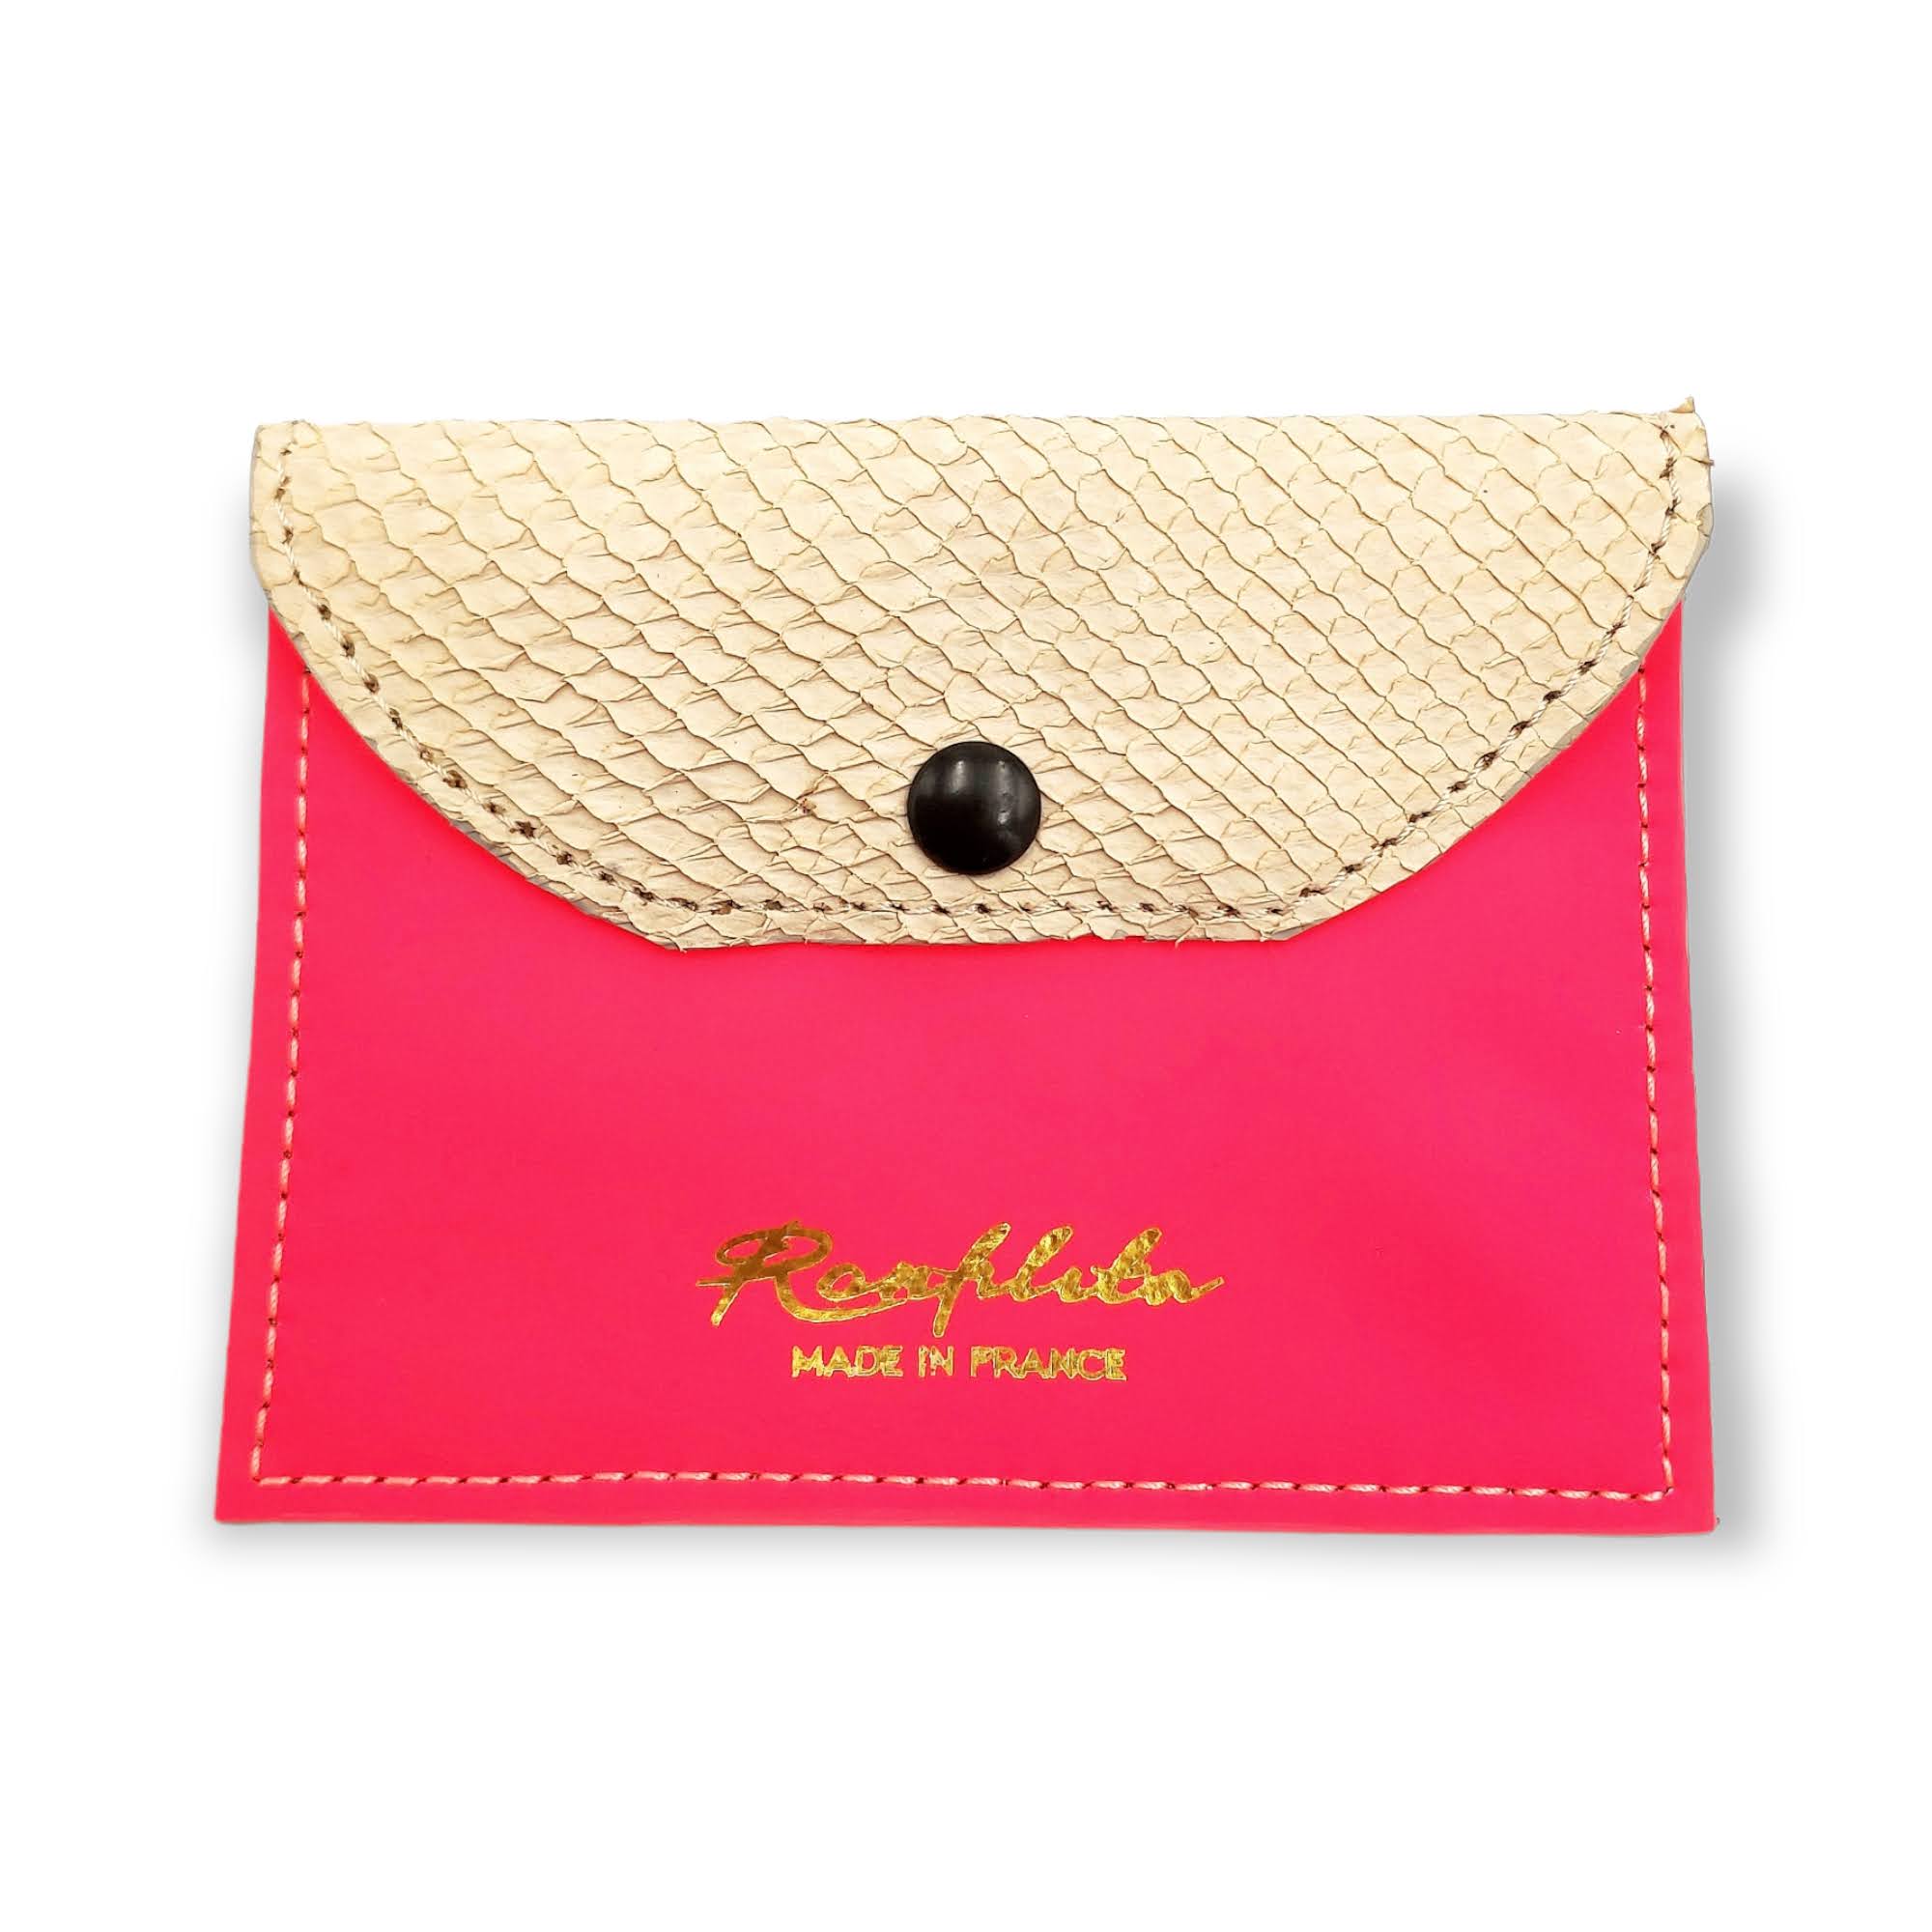 Porte carte femme luxe - Ronflita - Maroquinerie Made in France